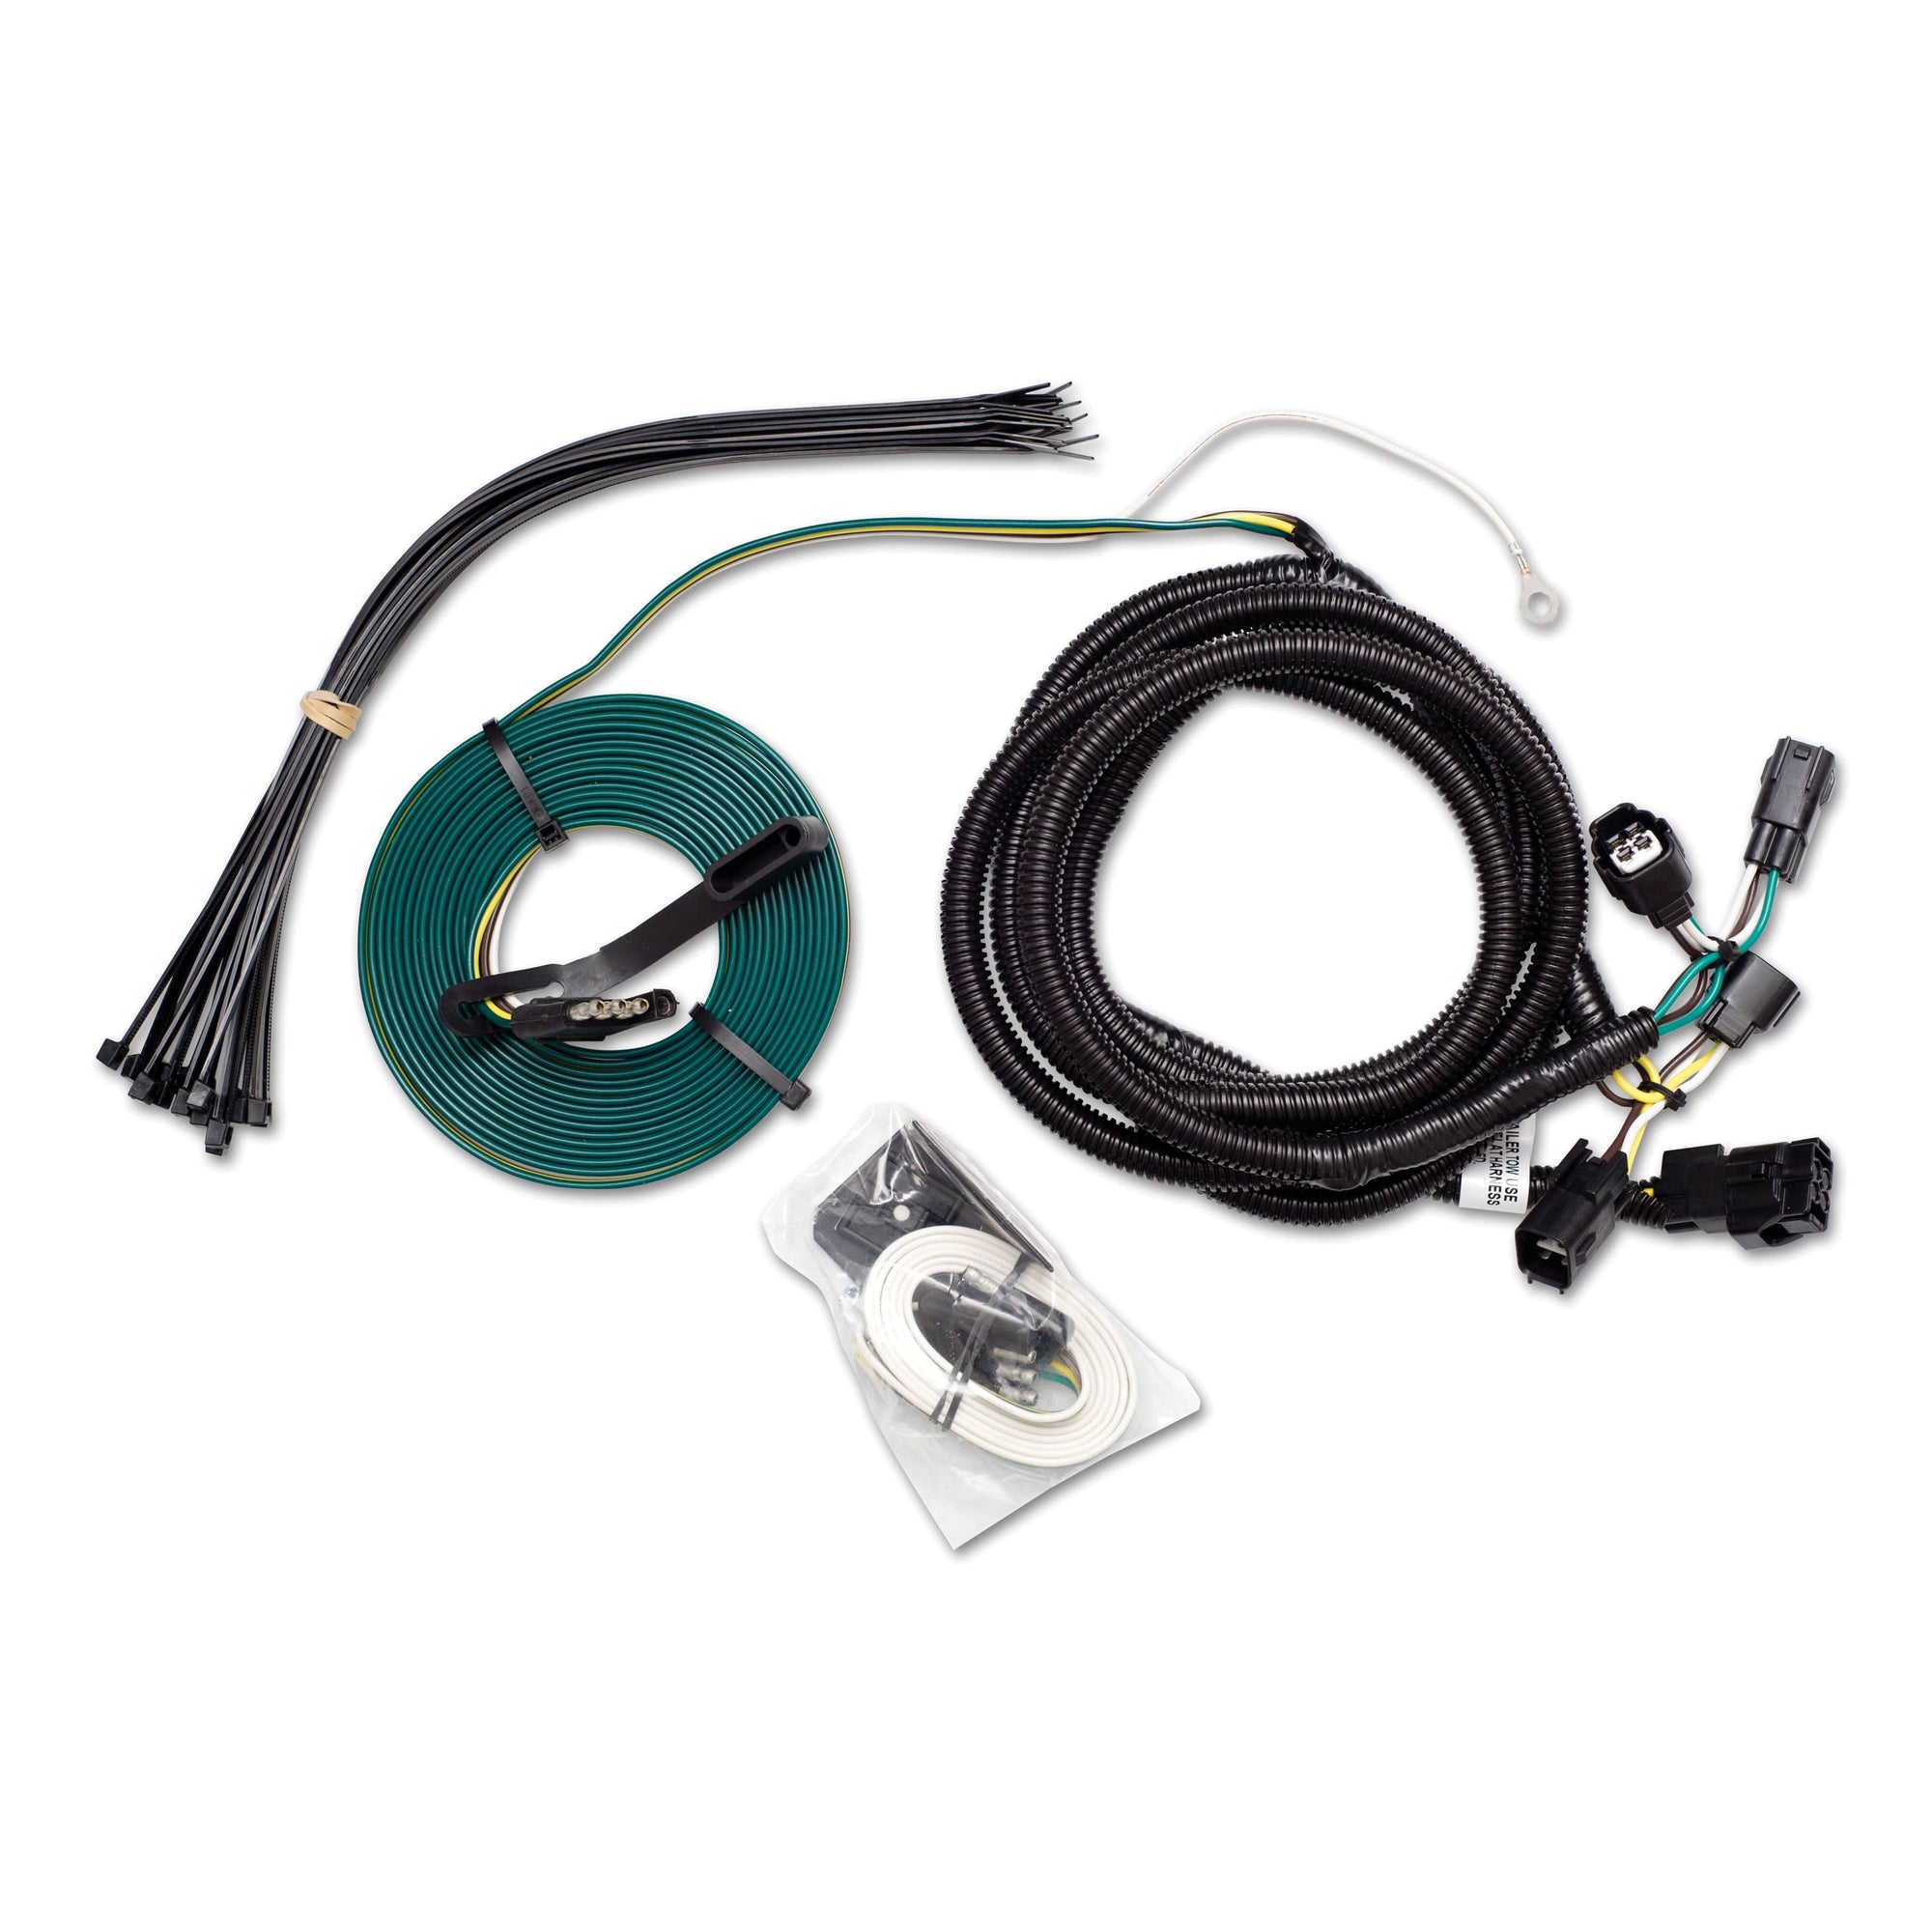 Demco 9523108 Towed Connector Vehicle Wiring Kit - For Chevrolet Malibu '13-'14